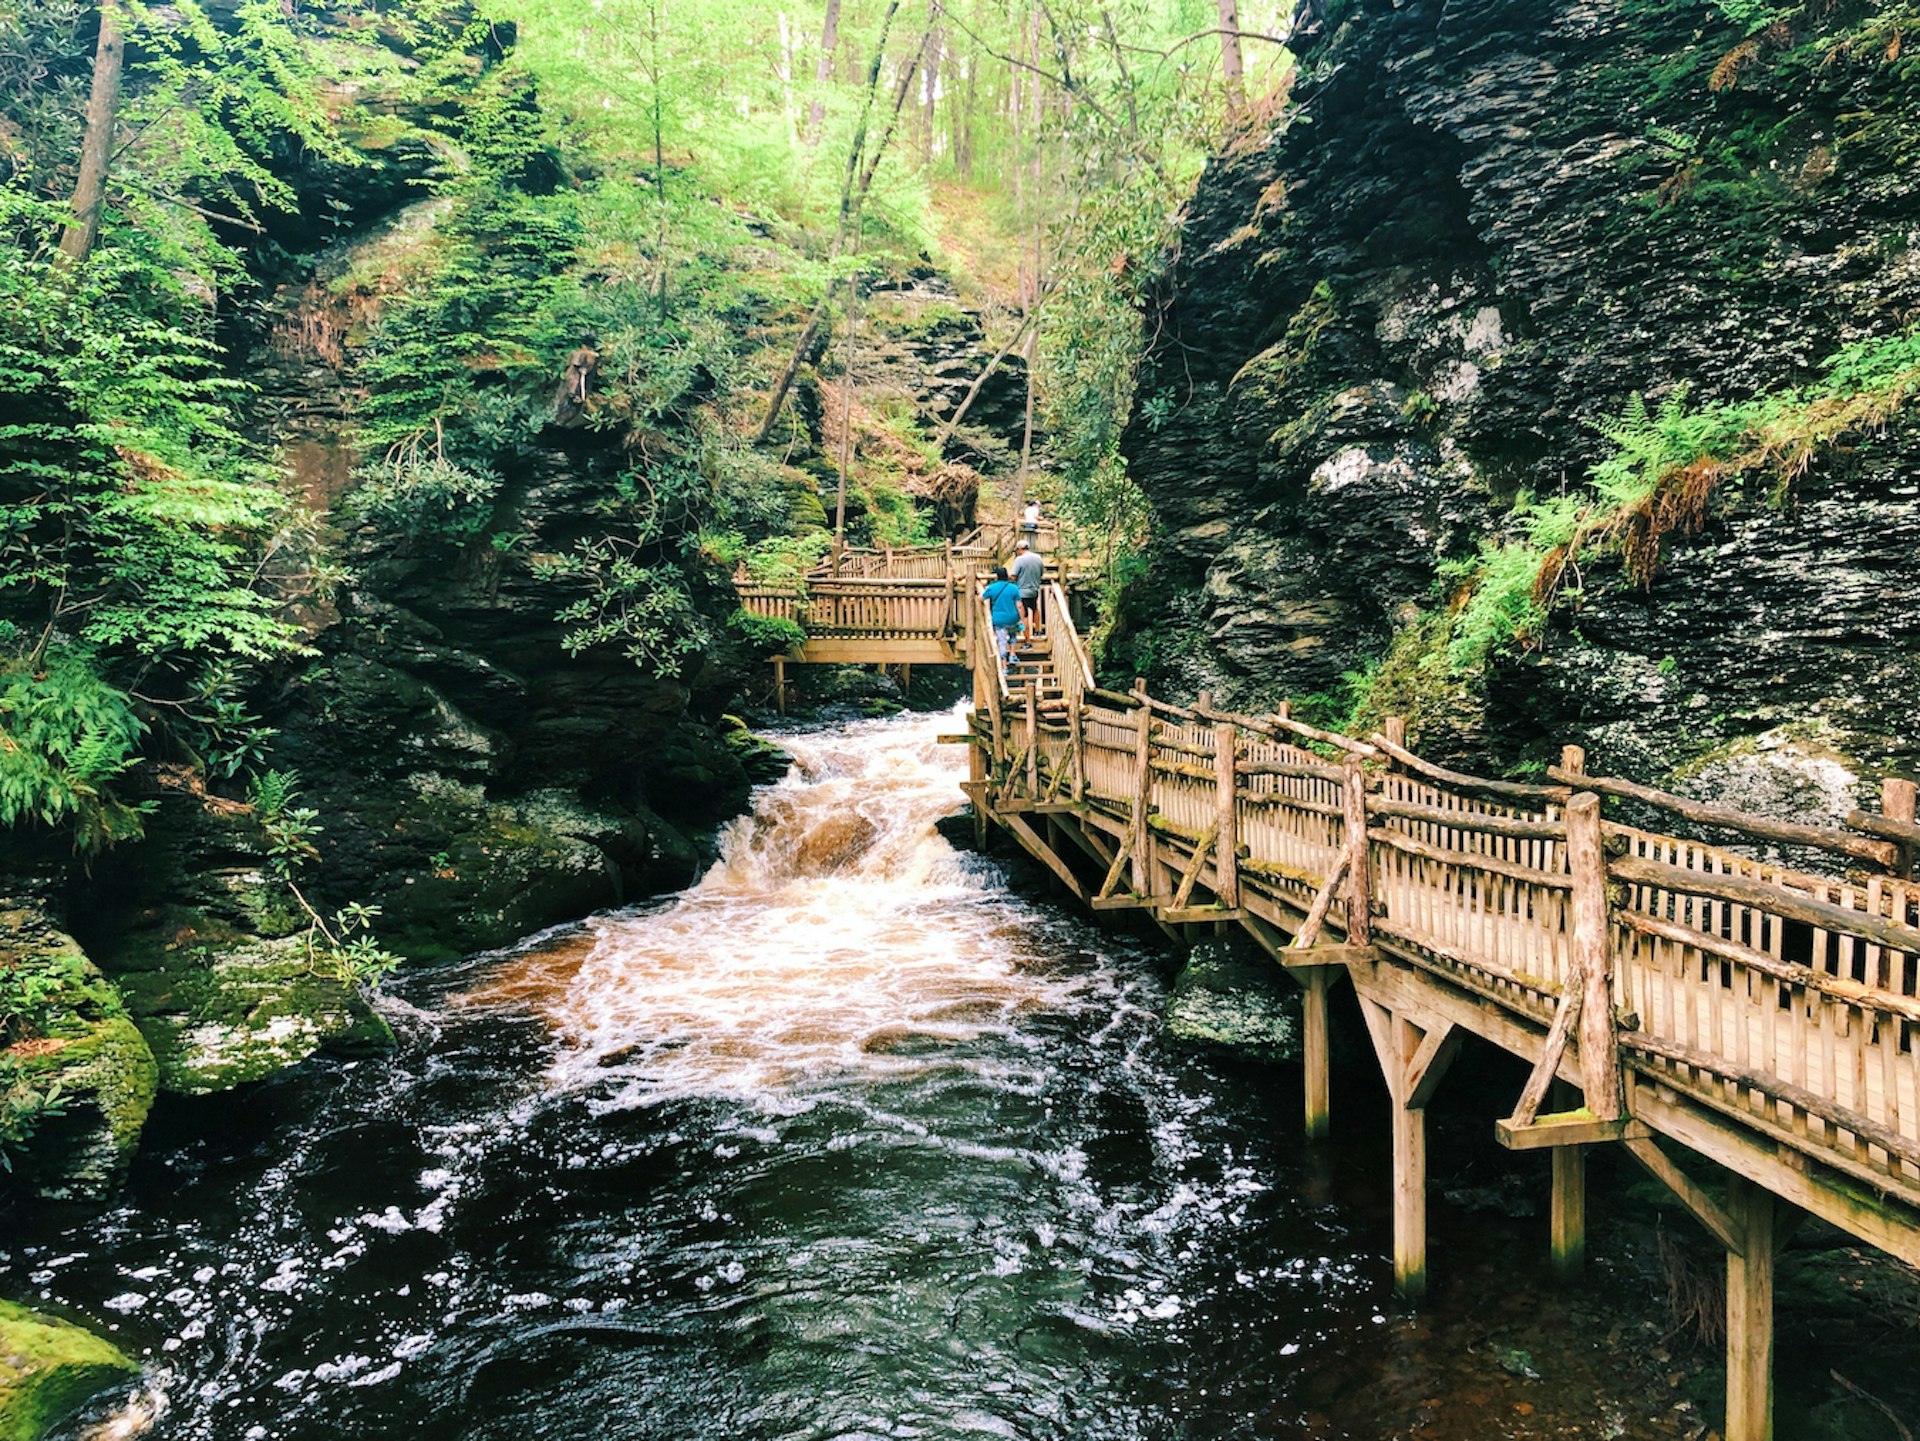 The boardwalk and stairs through Bushkill Falls Canyon in the Pocono Mountains, Northeast Pennsylvania, United States